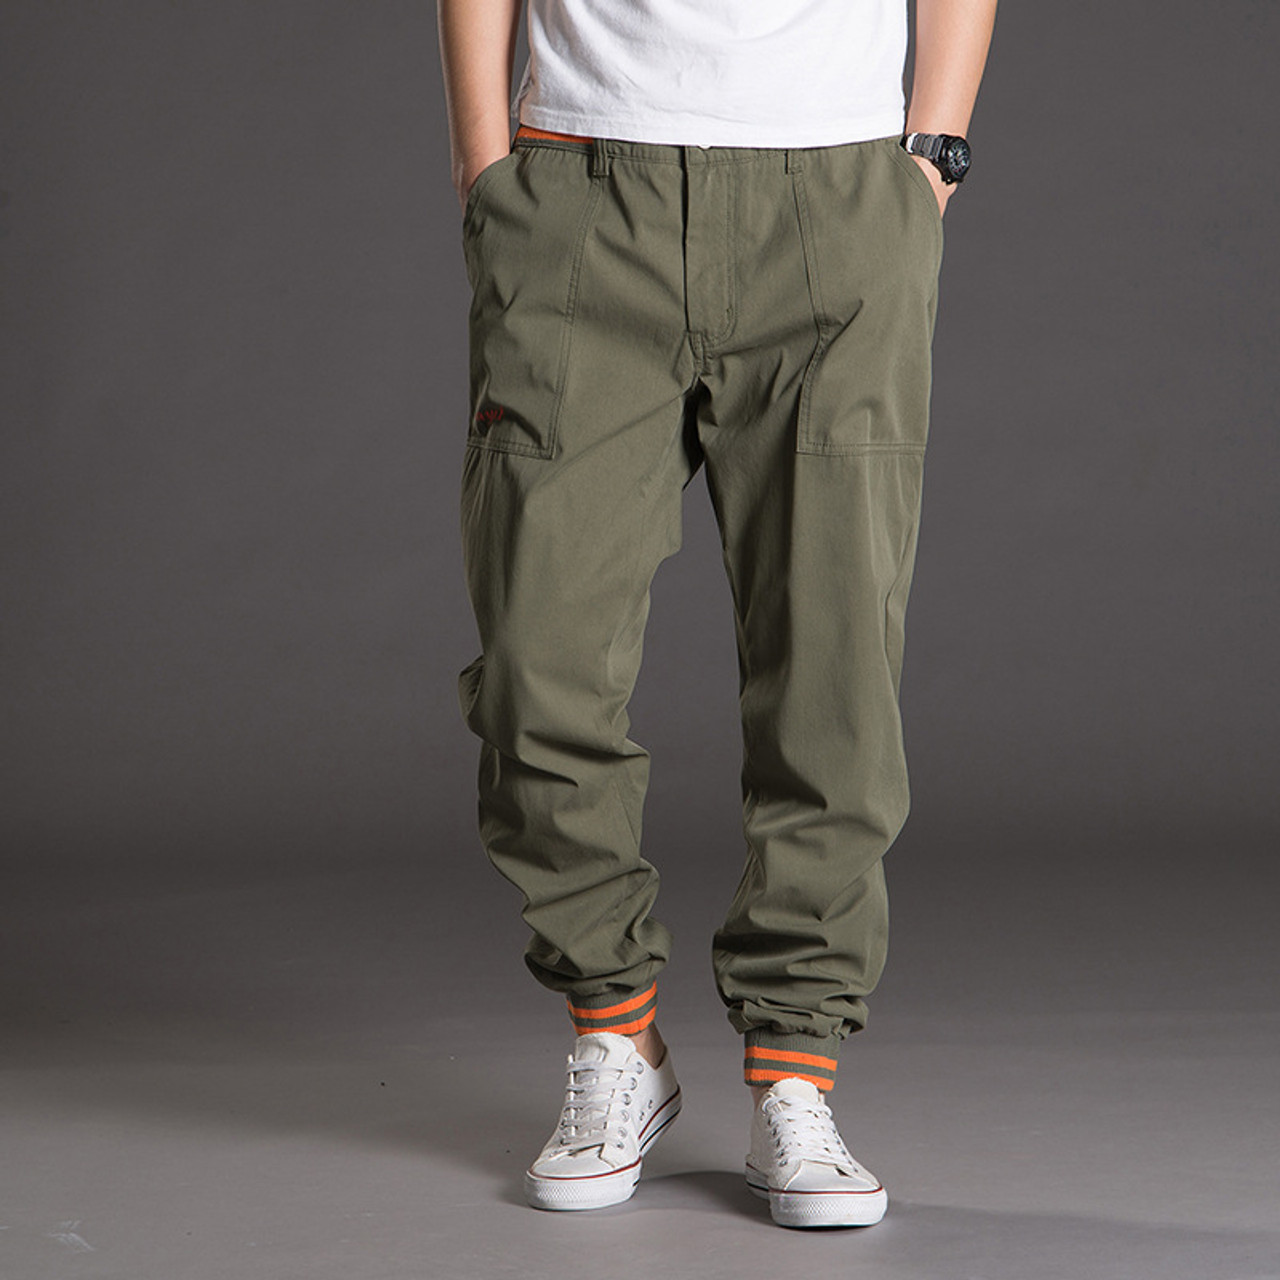 camo joggers mens outfit